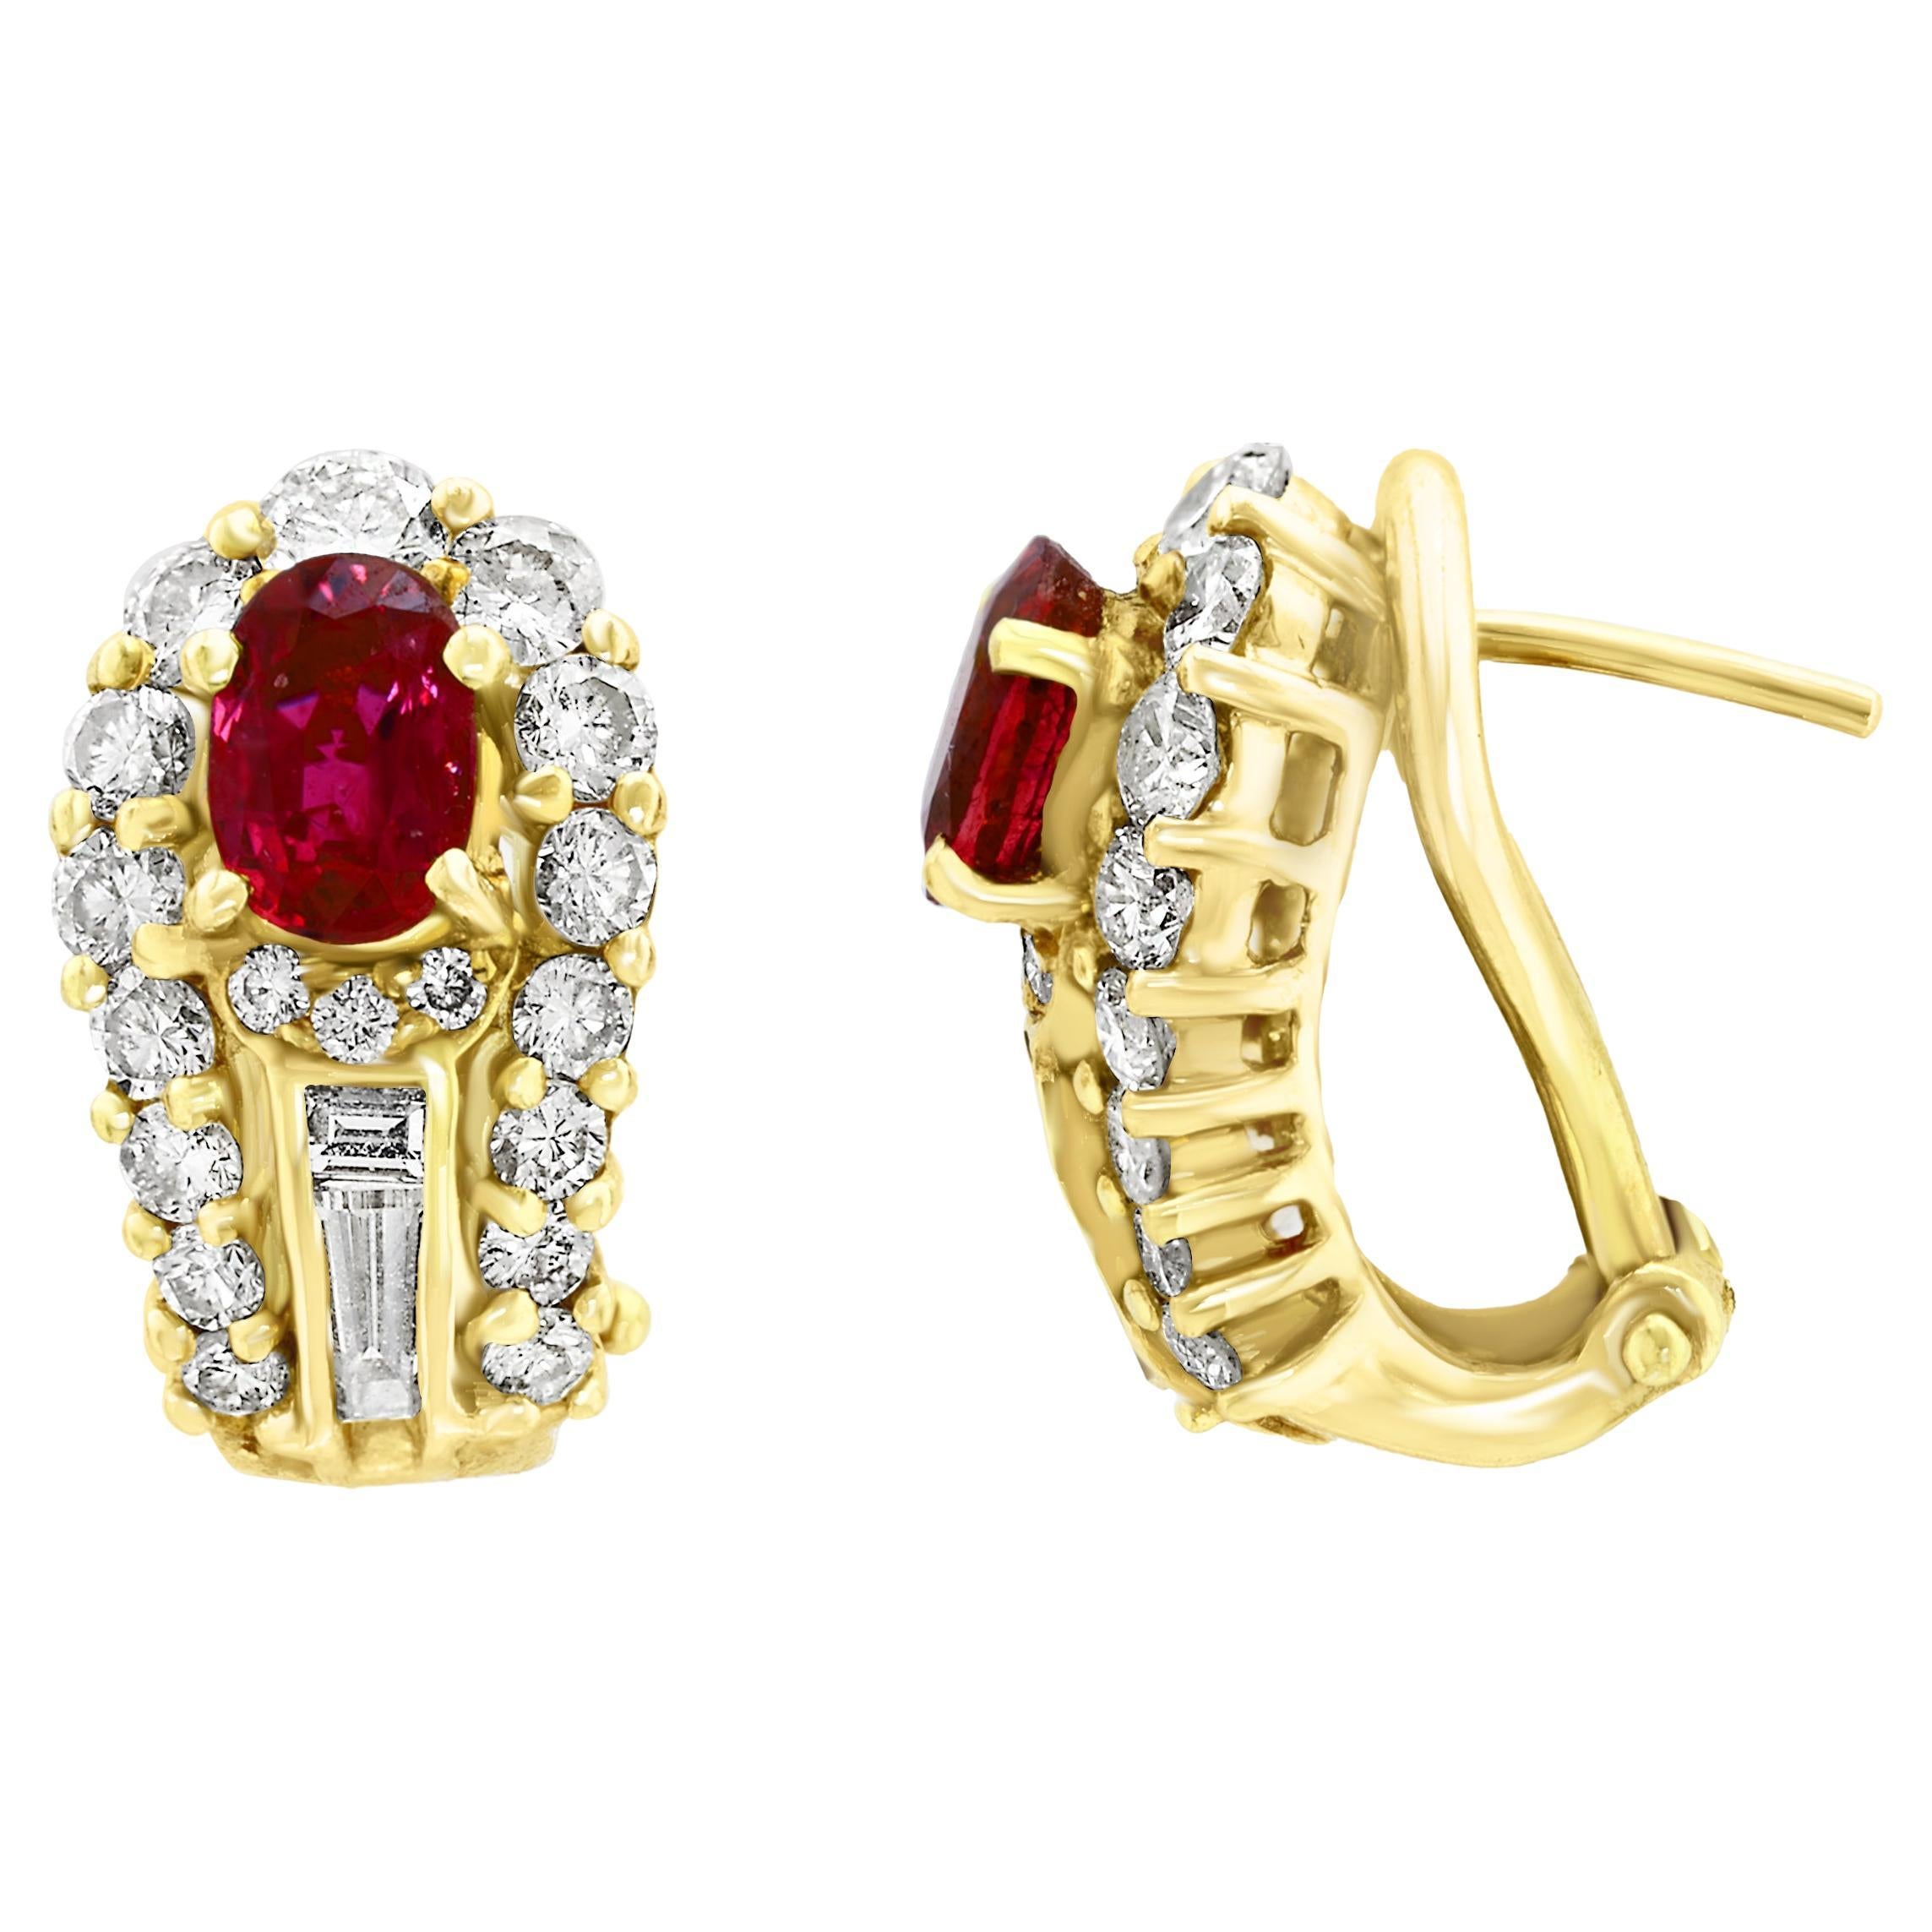 1.21 Carat Oval Cut Ruby and Diamond Earrings in 18K Yellow Gold For Sale